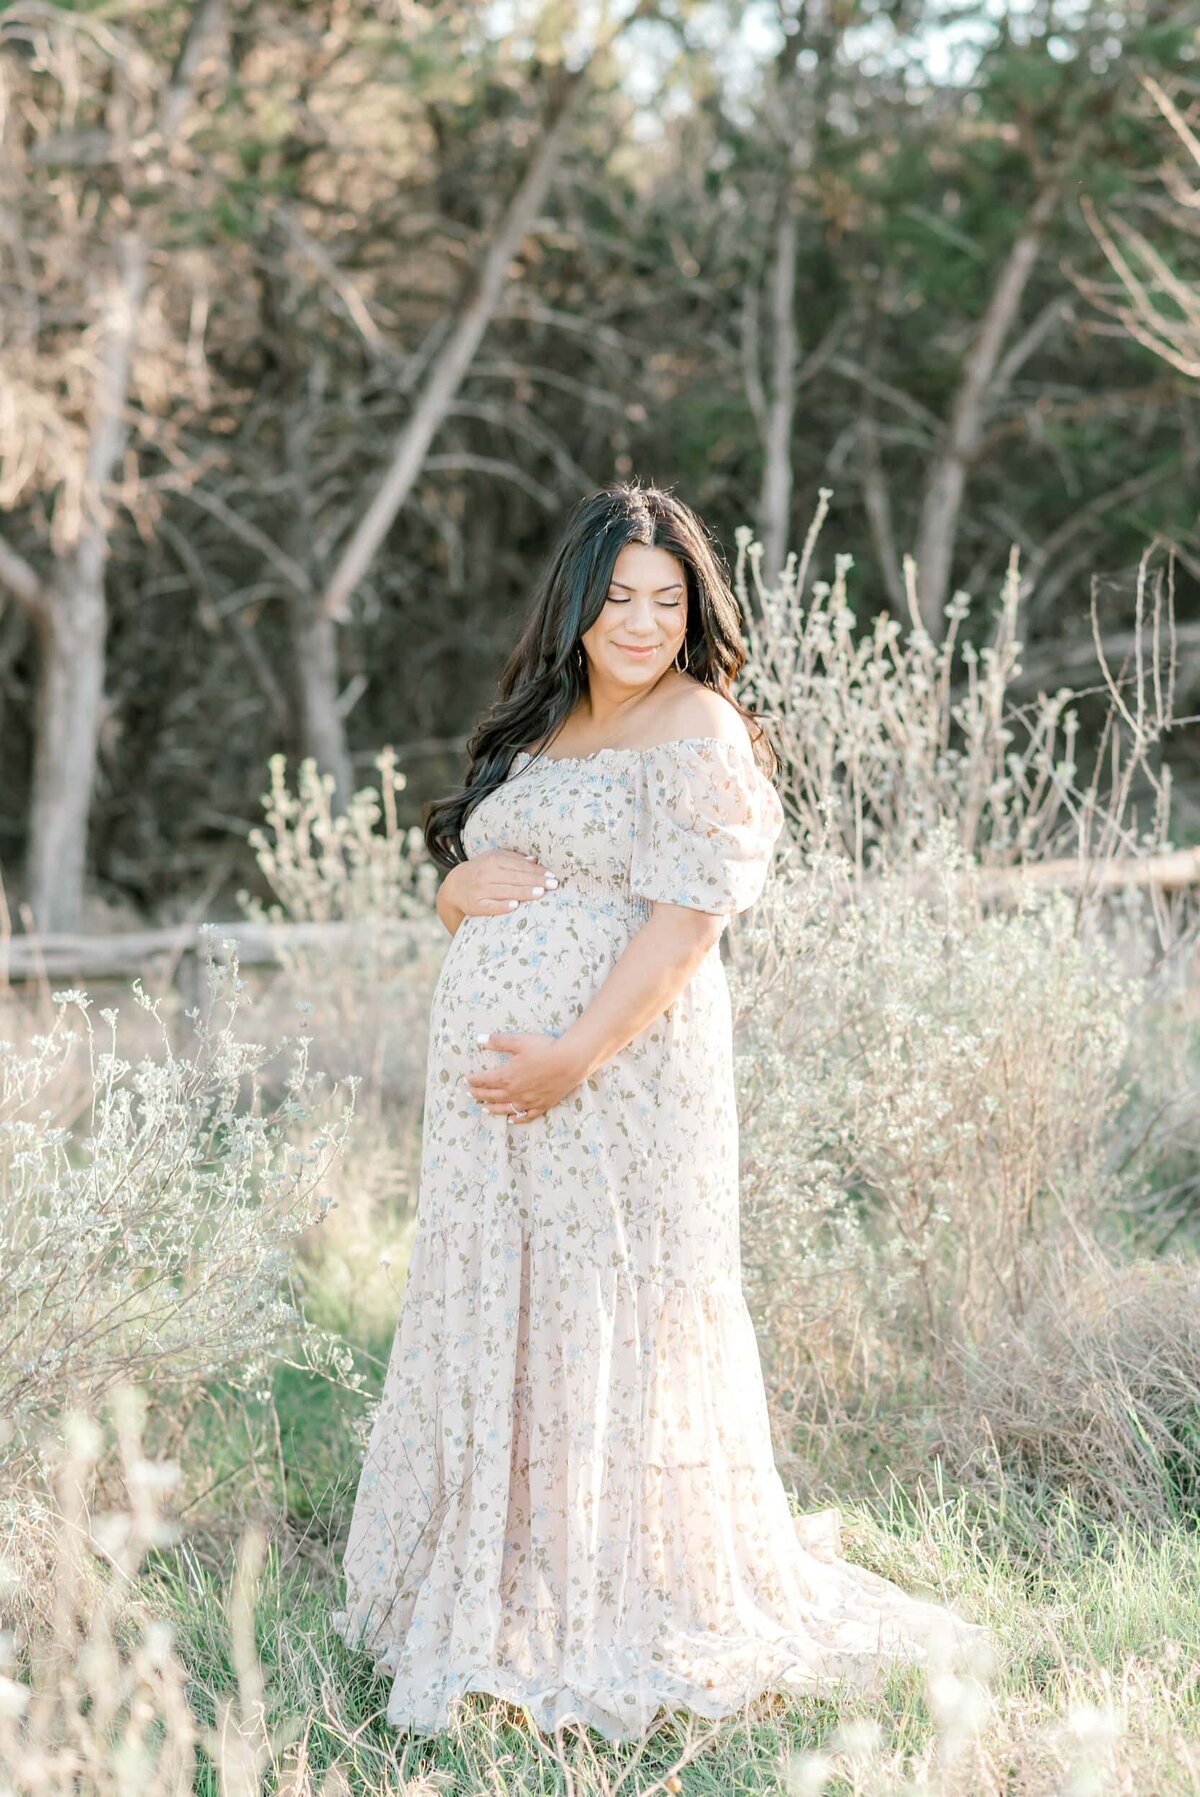 San-Antonio-Maternity-Photography-3.4.23- Melanie_s Maternity Session- Laurie Adalle Photography-18